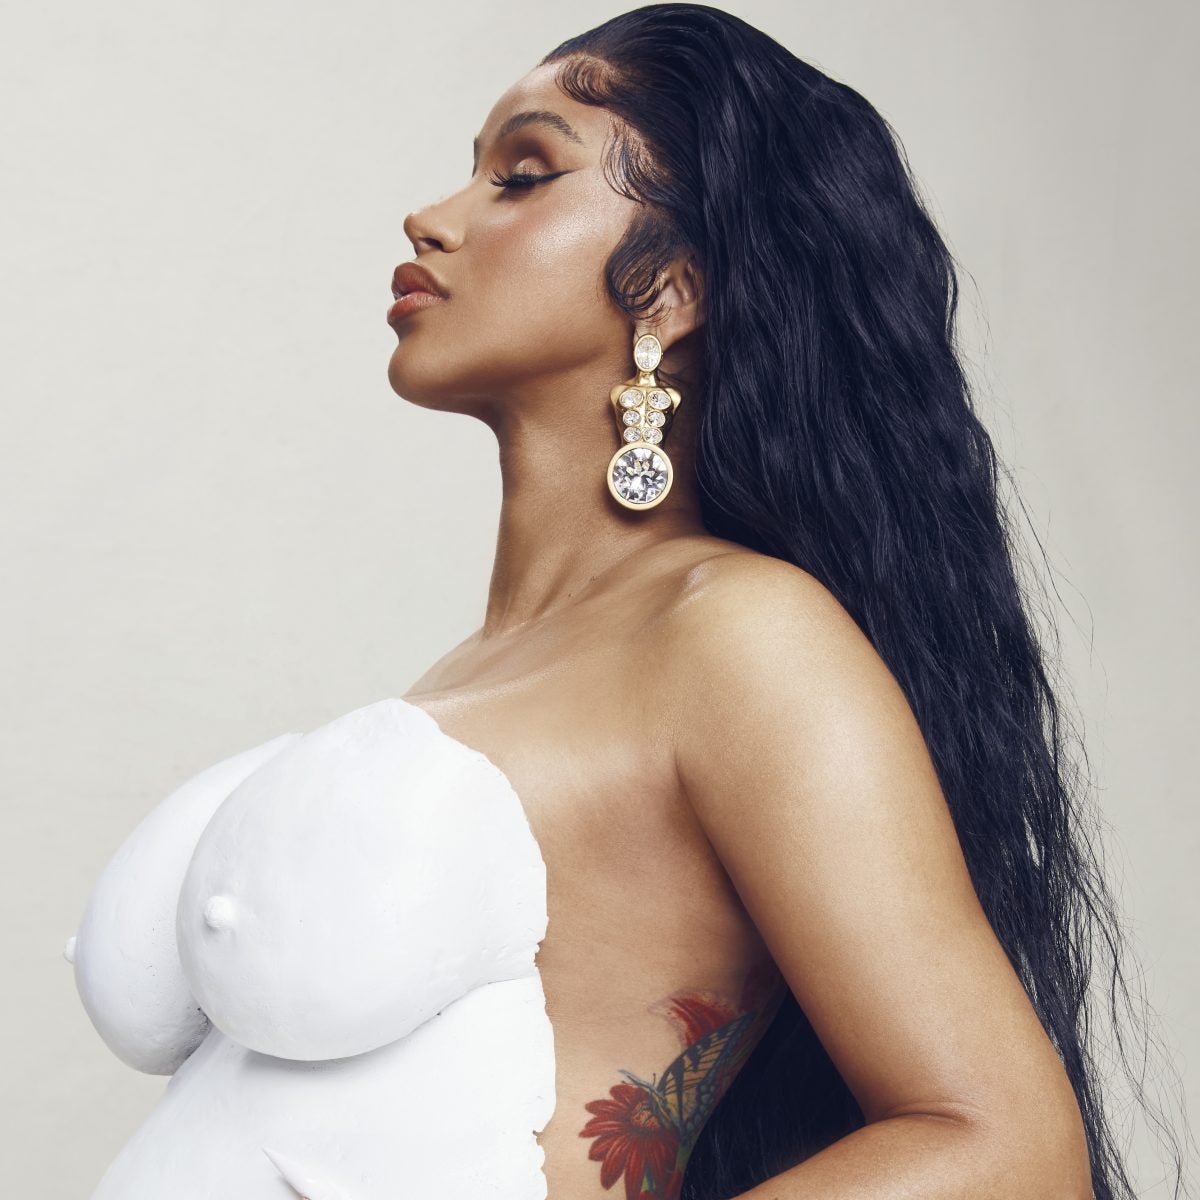 Cardi B Is Expecting Baby No. 2 With Husband Offset